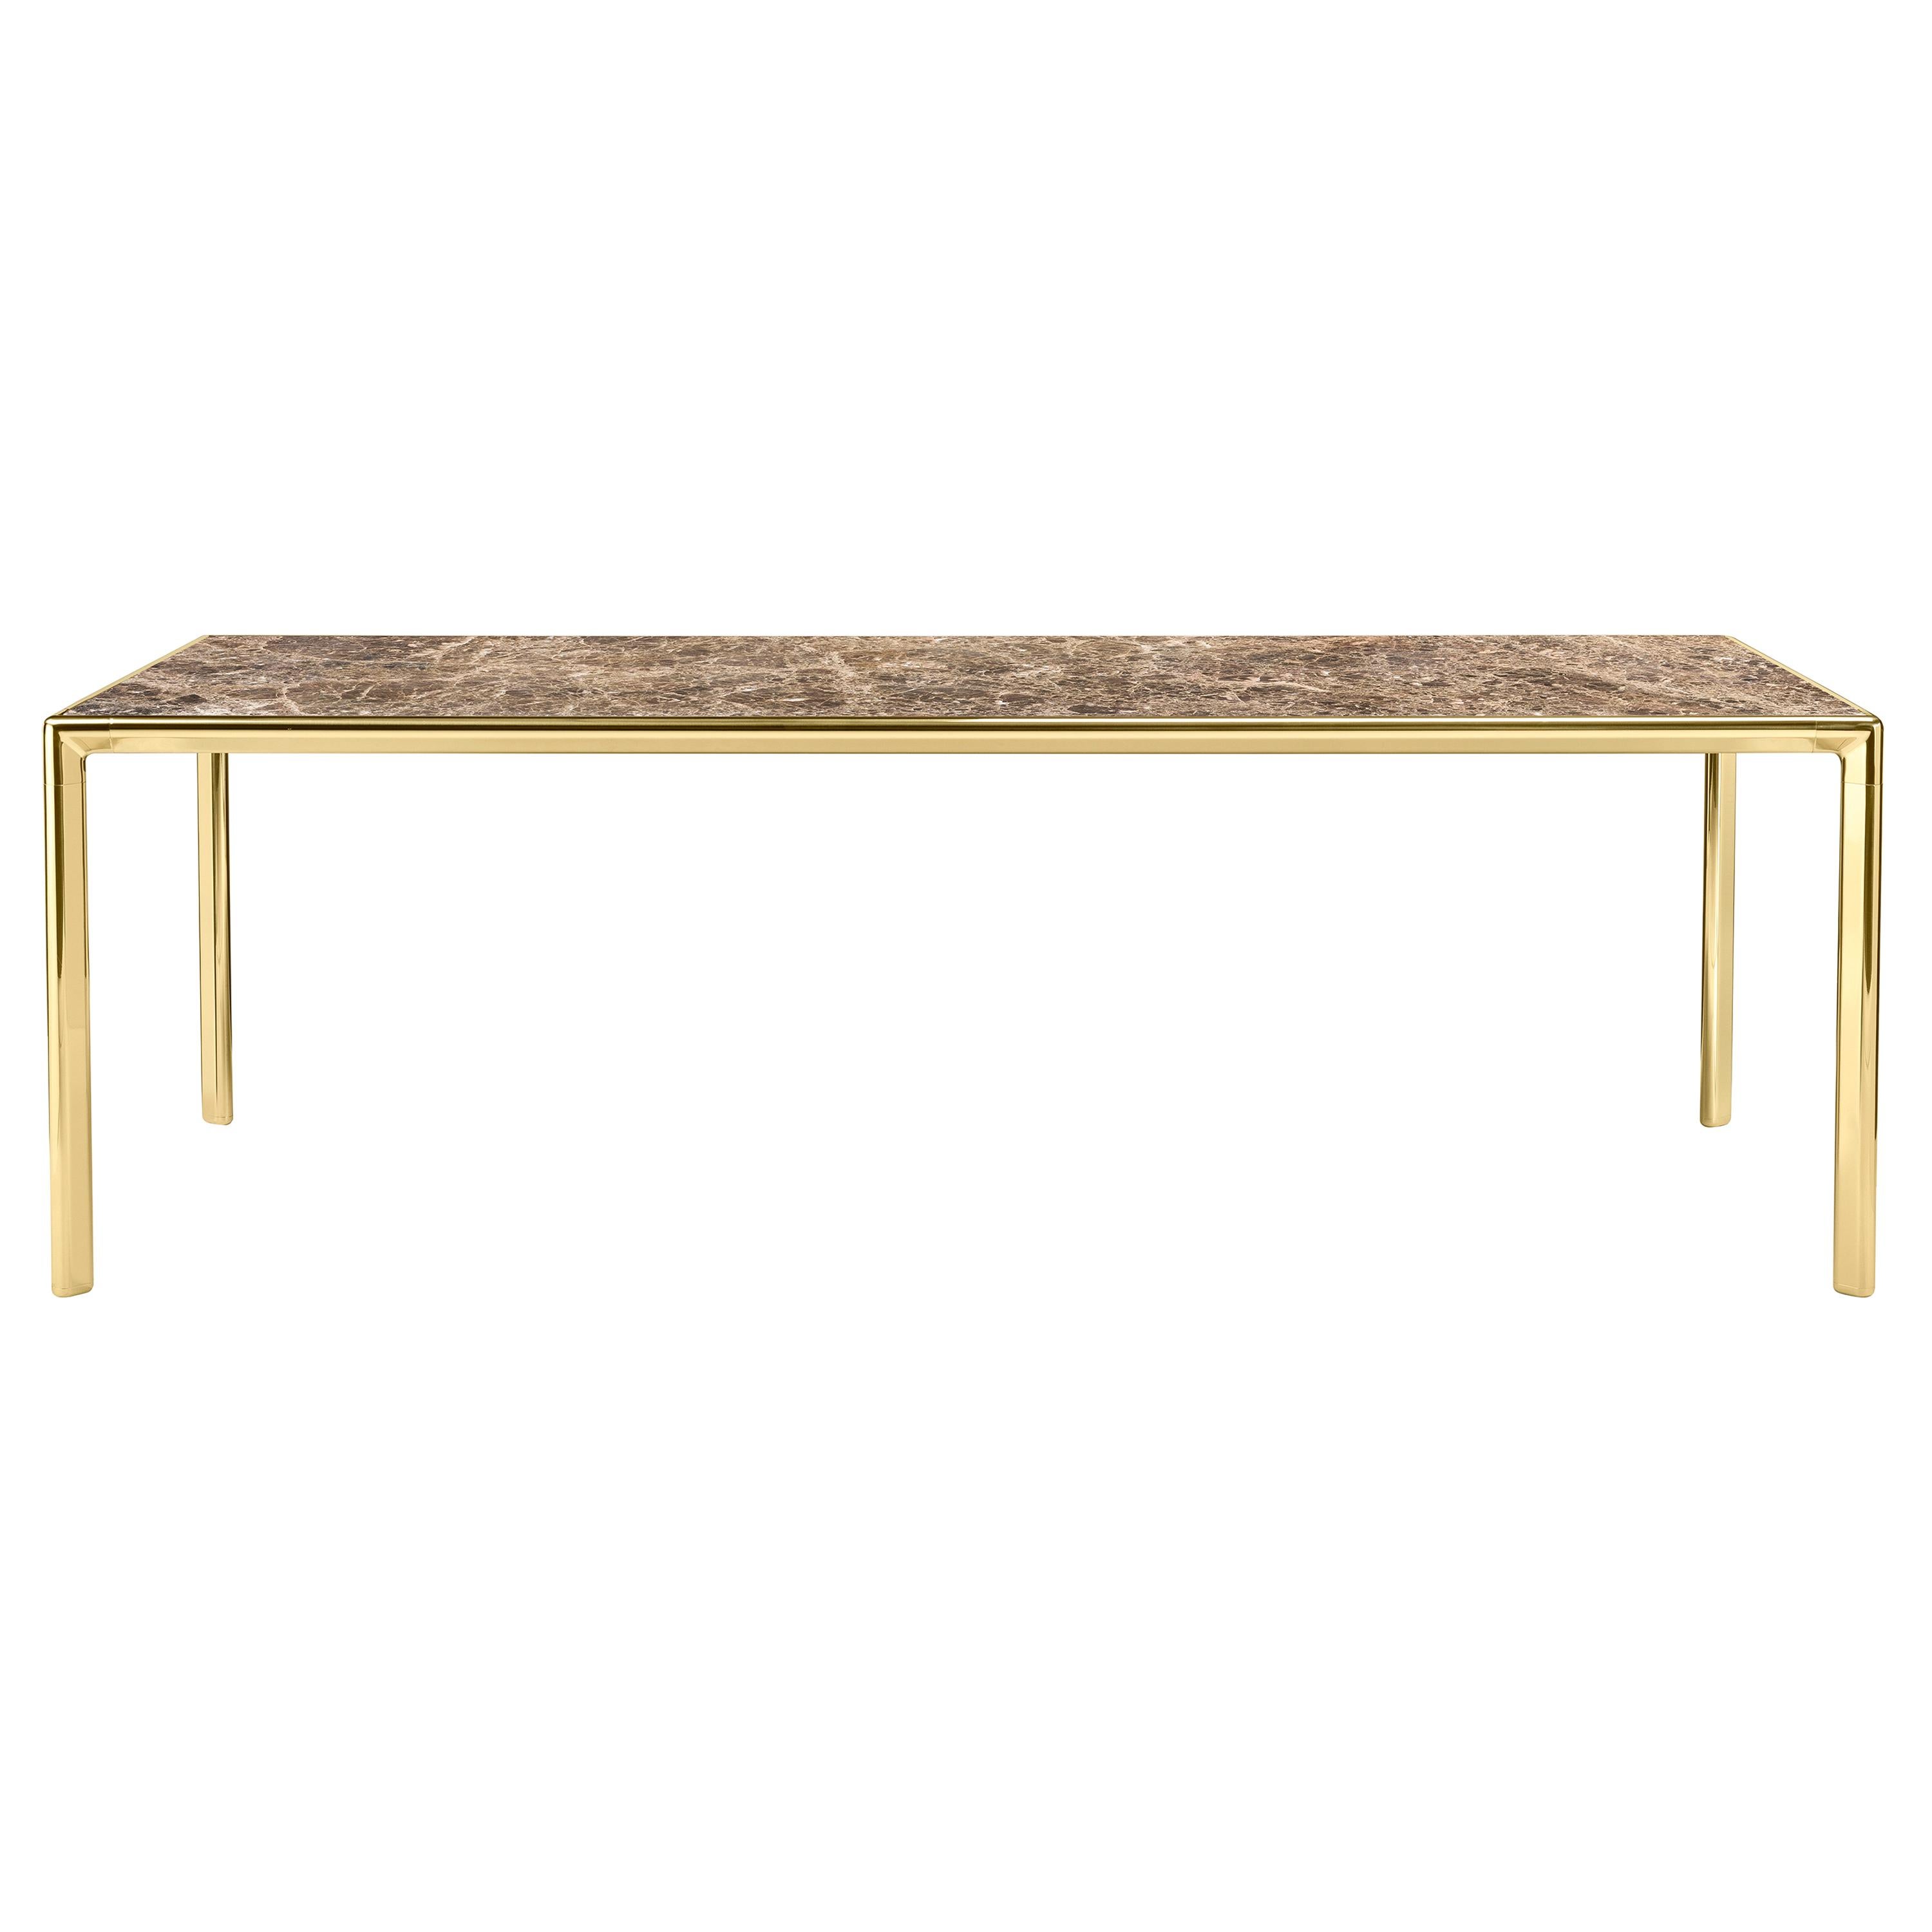 Frame Medium Dining Table with Emperador Dark Marble Top and Polished Brass